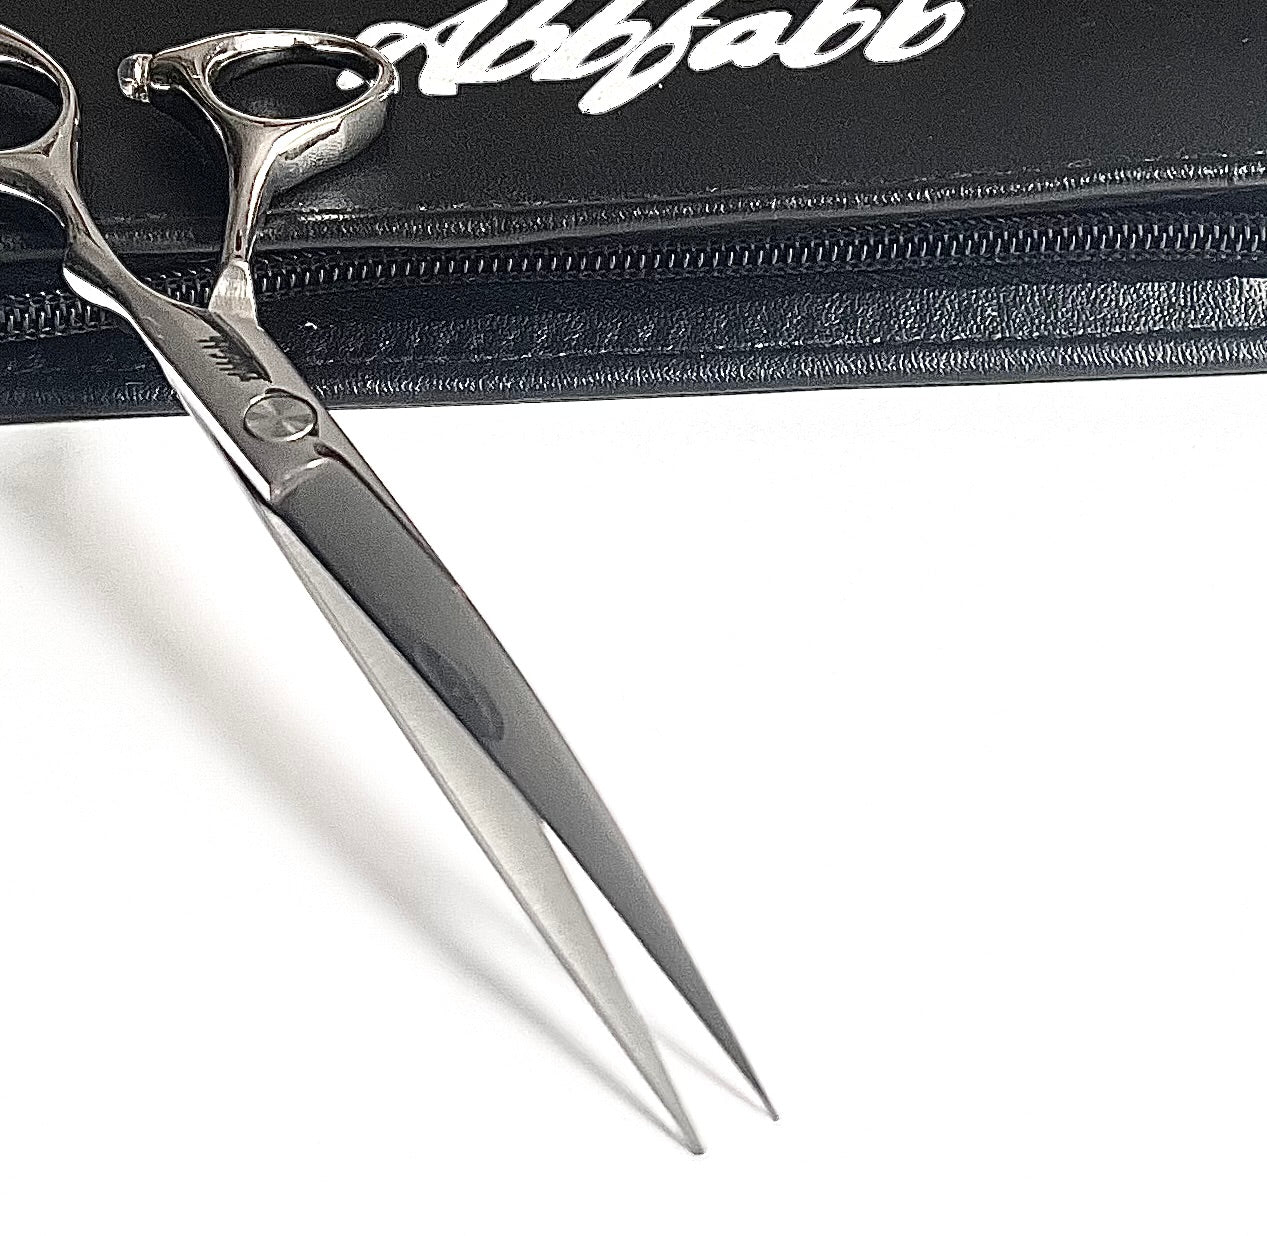 6.5" Curved Dog Grooming Scissor with Pinpoint Tip by Abbfabb Grooming Scissors Ltd